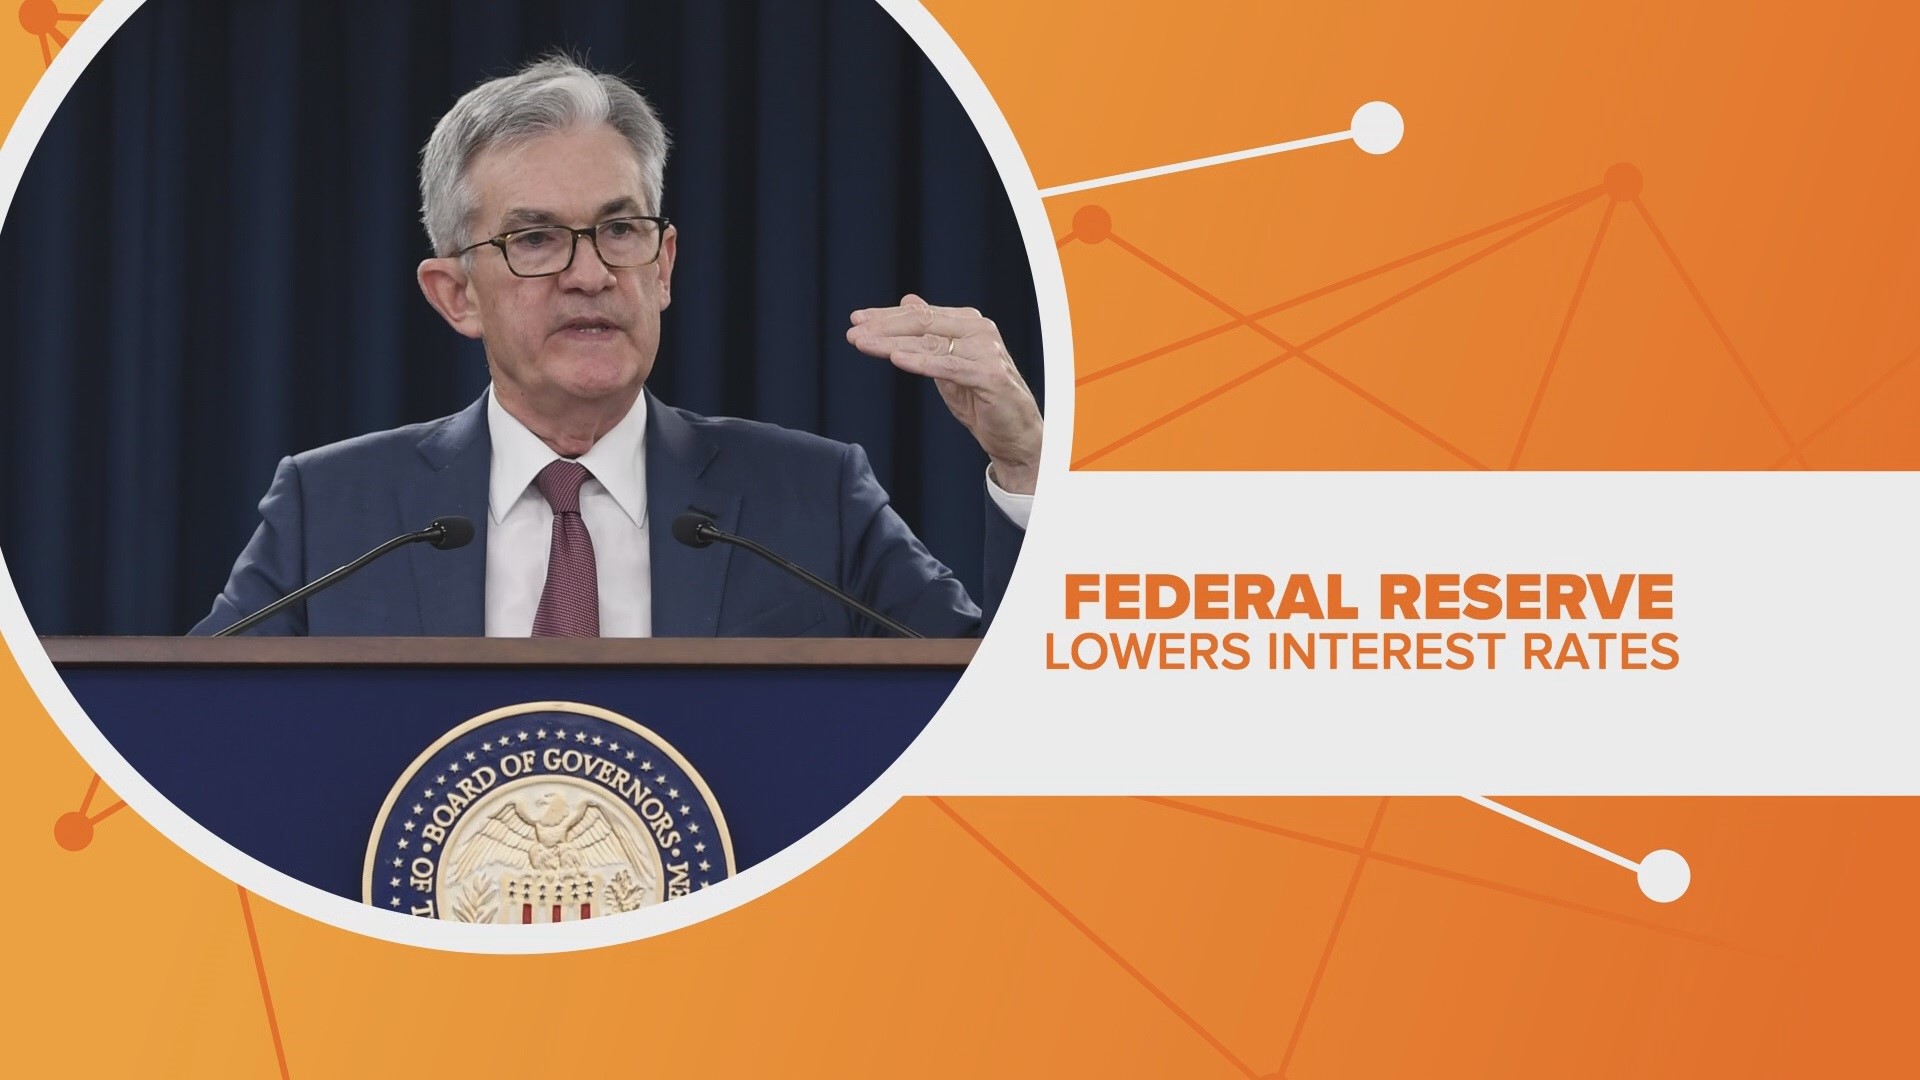 On Sunday the Federal Reserve cut interest rates to near 0% but what does that mean and why should you care? Drew Carney explains.